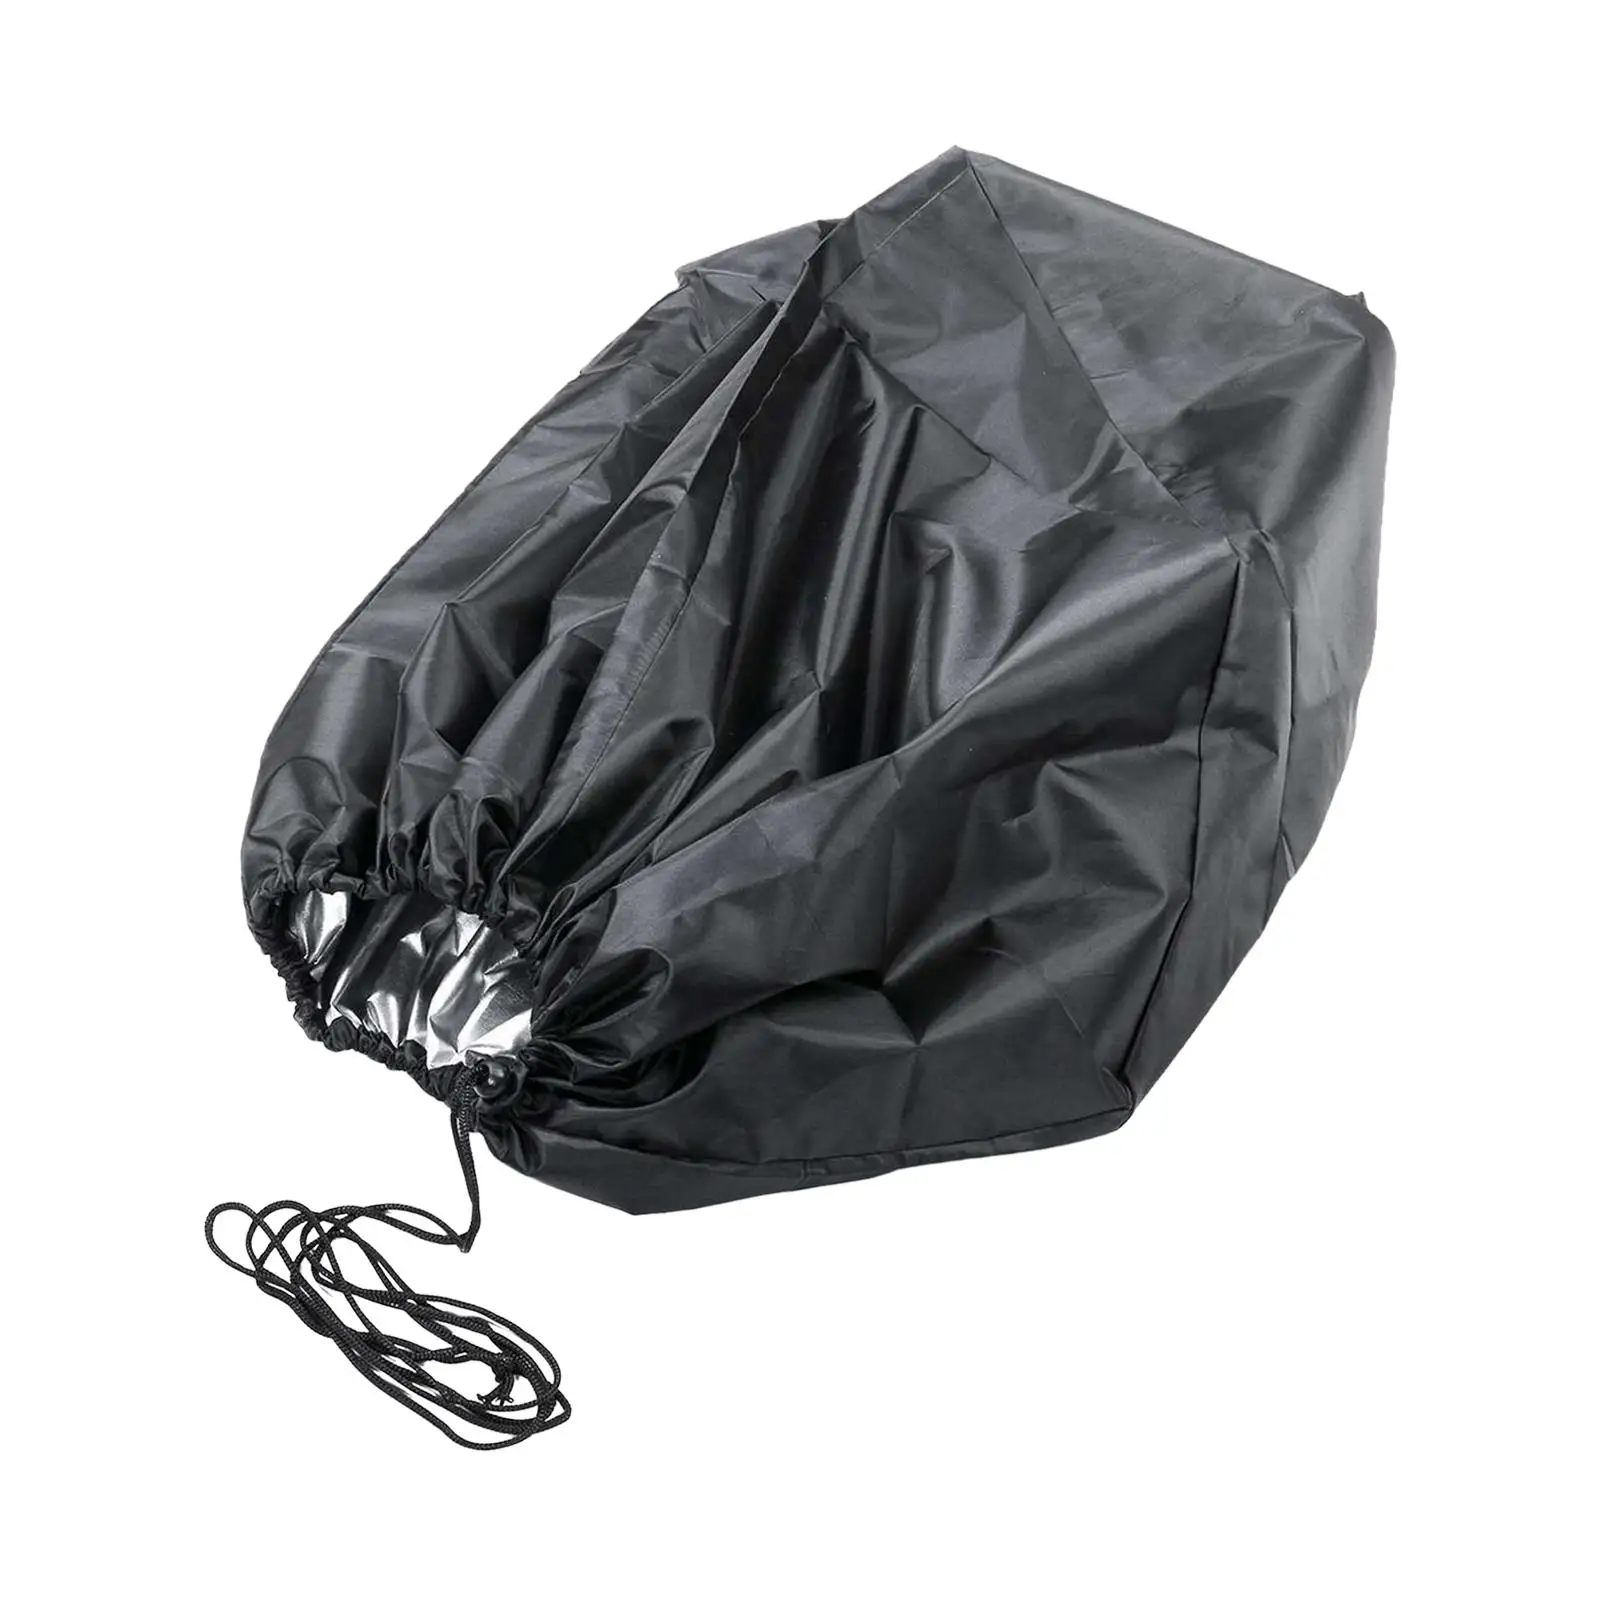 Boat Chair Cover Helmsman Chair Protective Cover Heavy Duty Boat Chair Seat Cover Folding